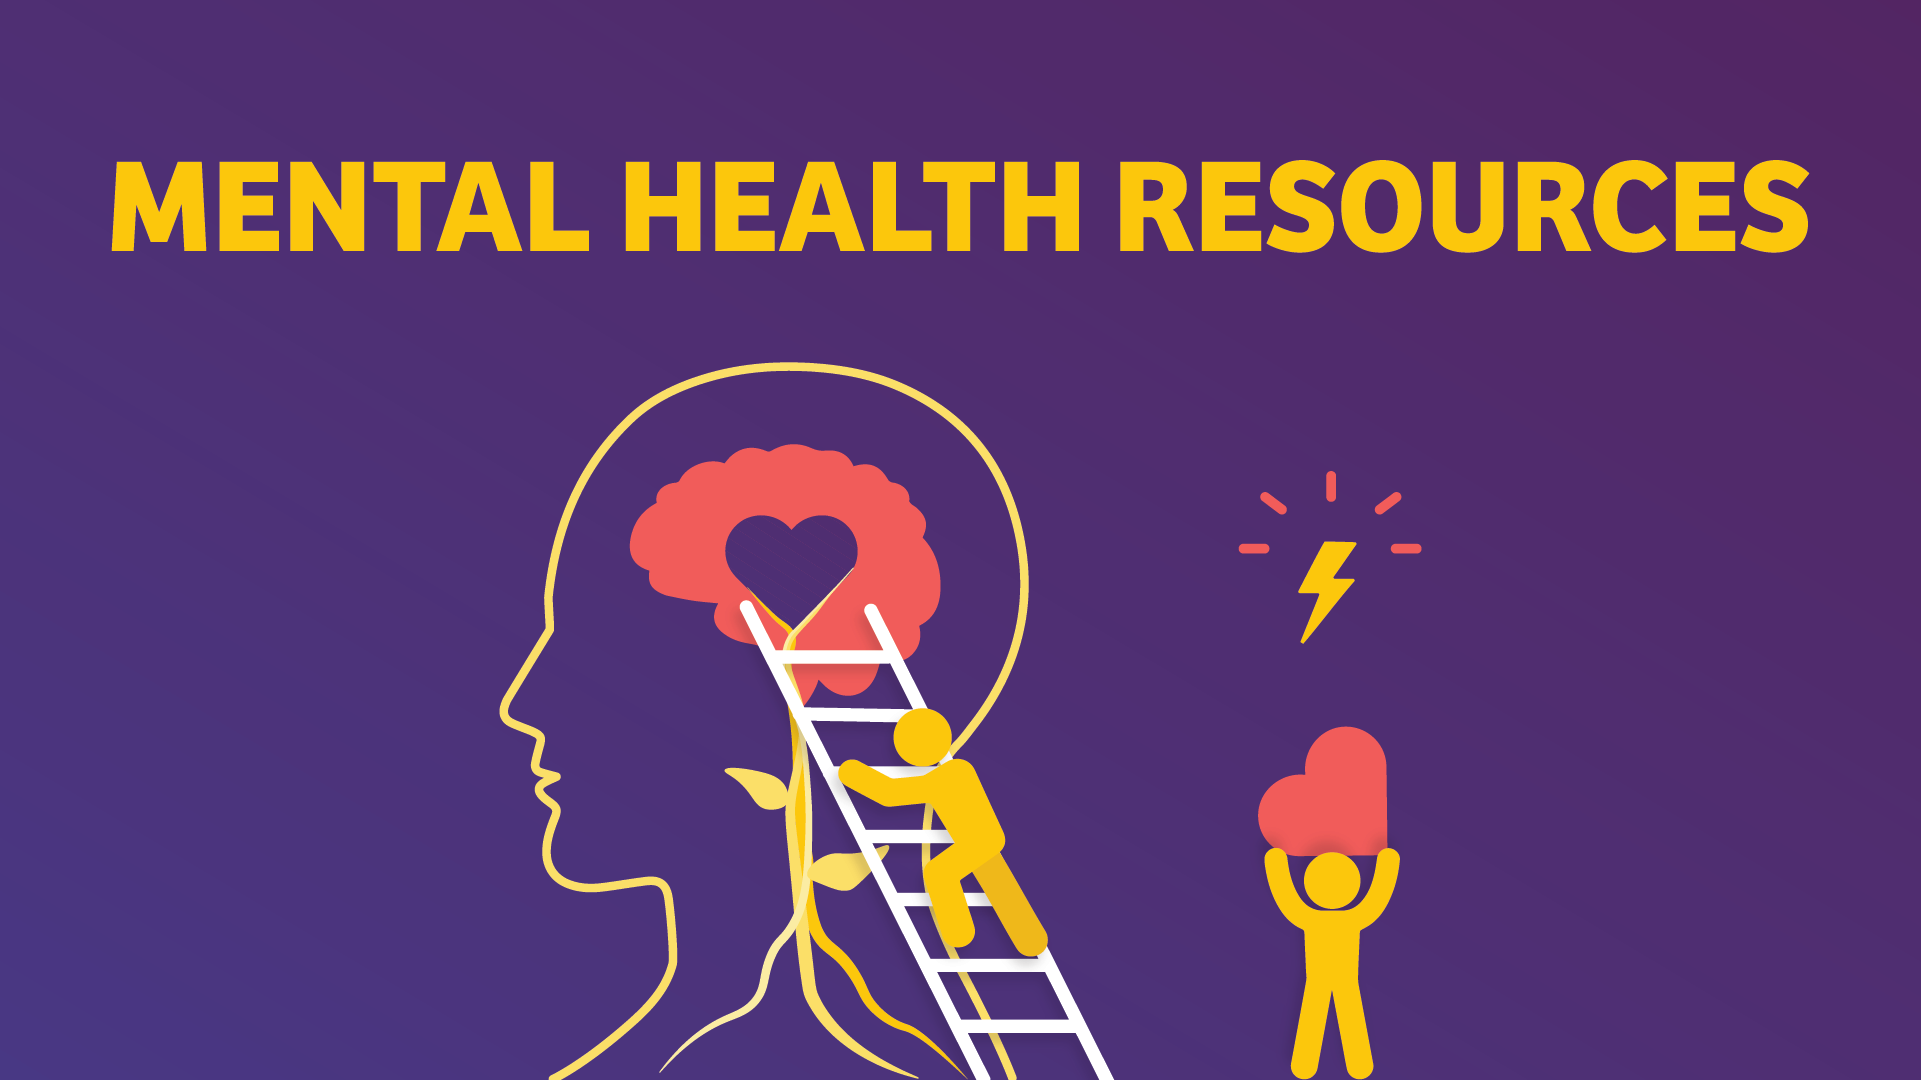 Immediate Resources for Mental Health